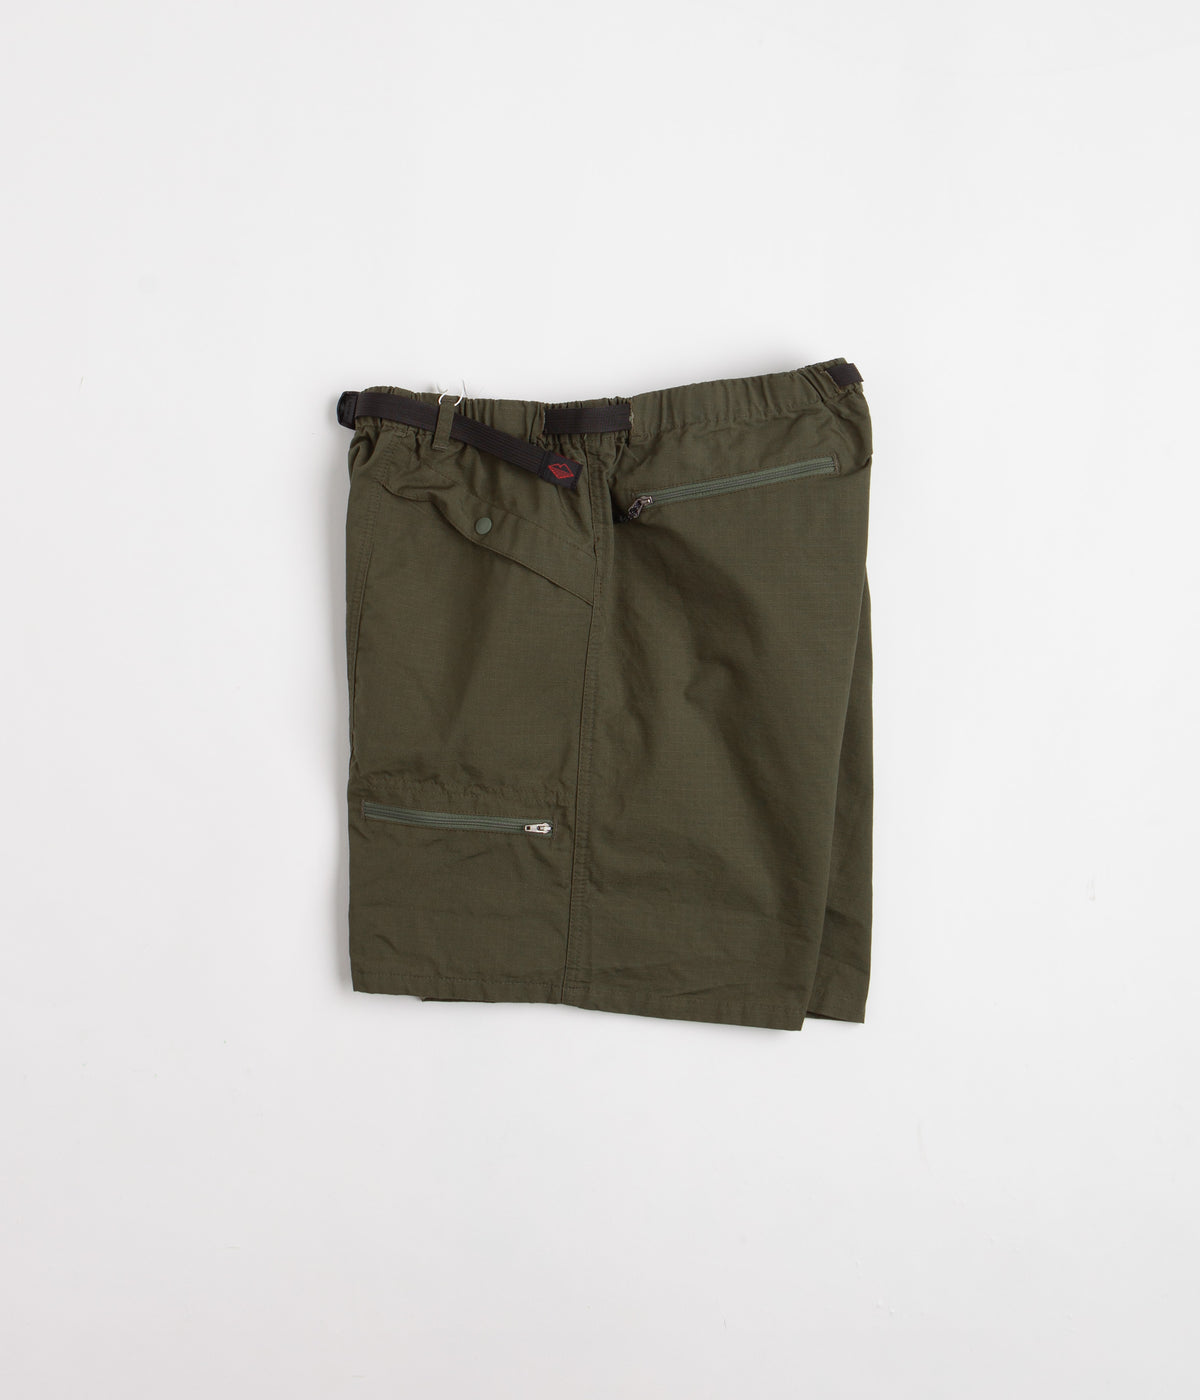 Battenwear Camp Shorts - Olive Drab Ripstop | Always in Colour